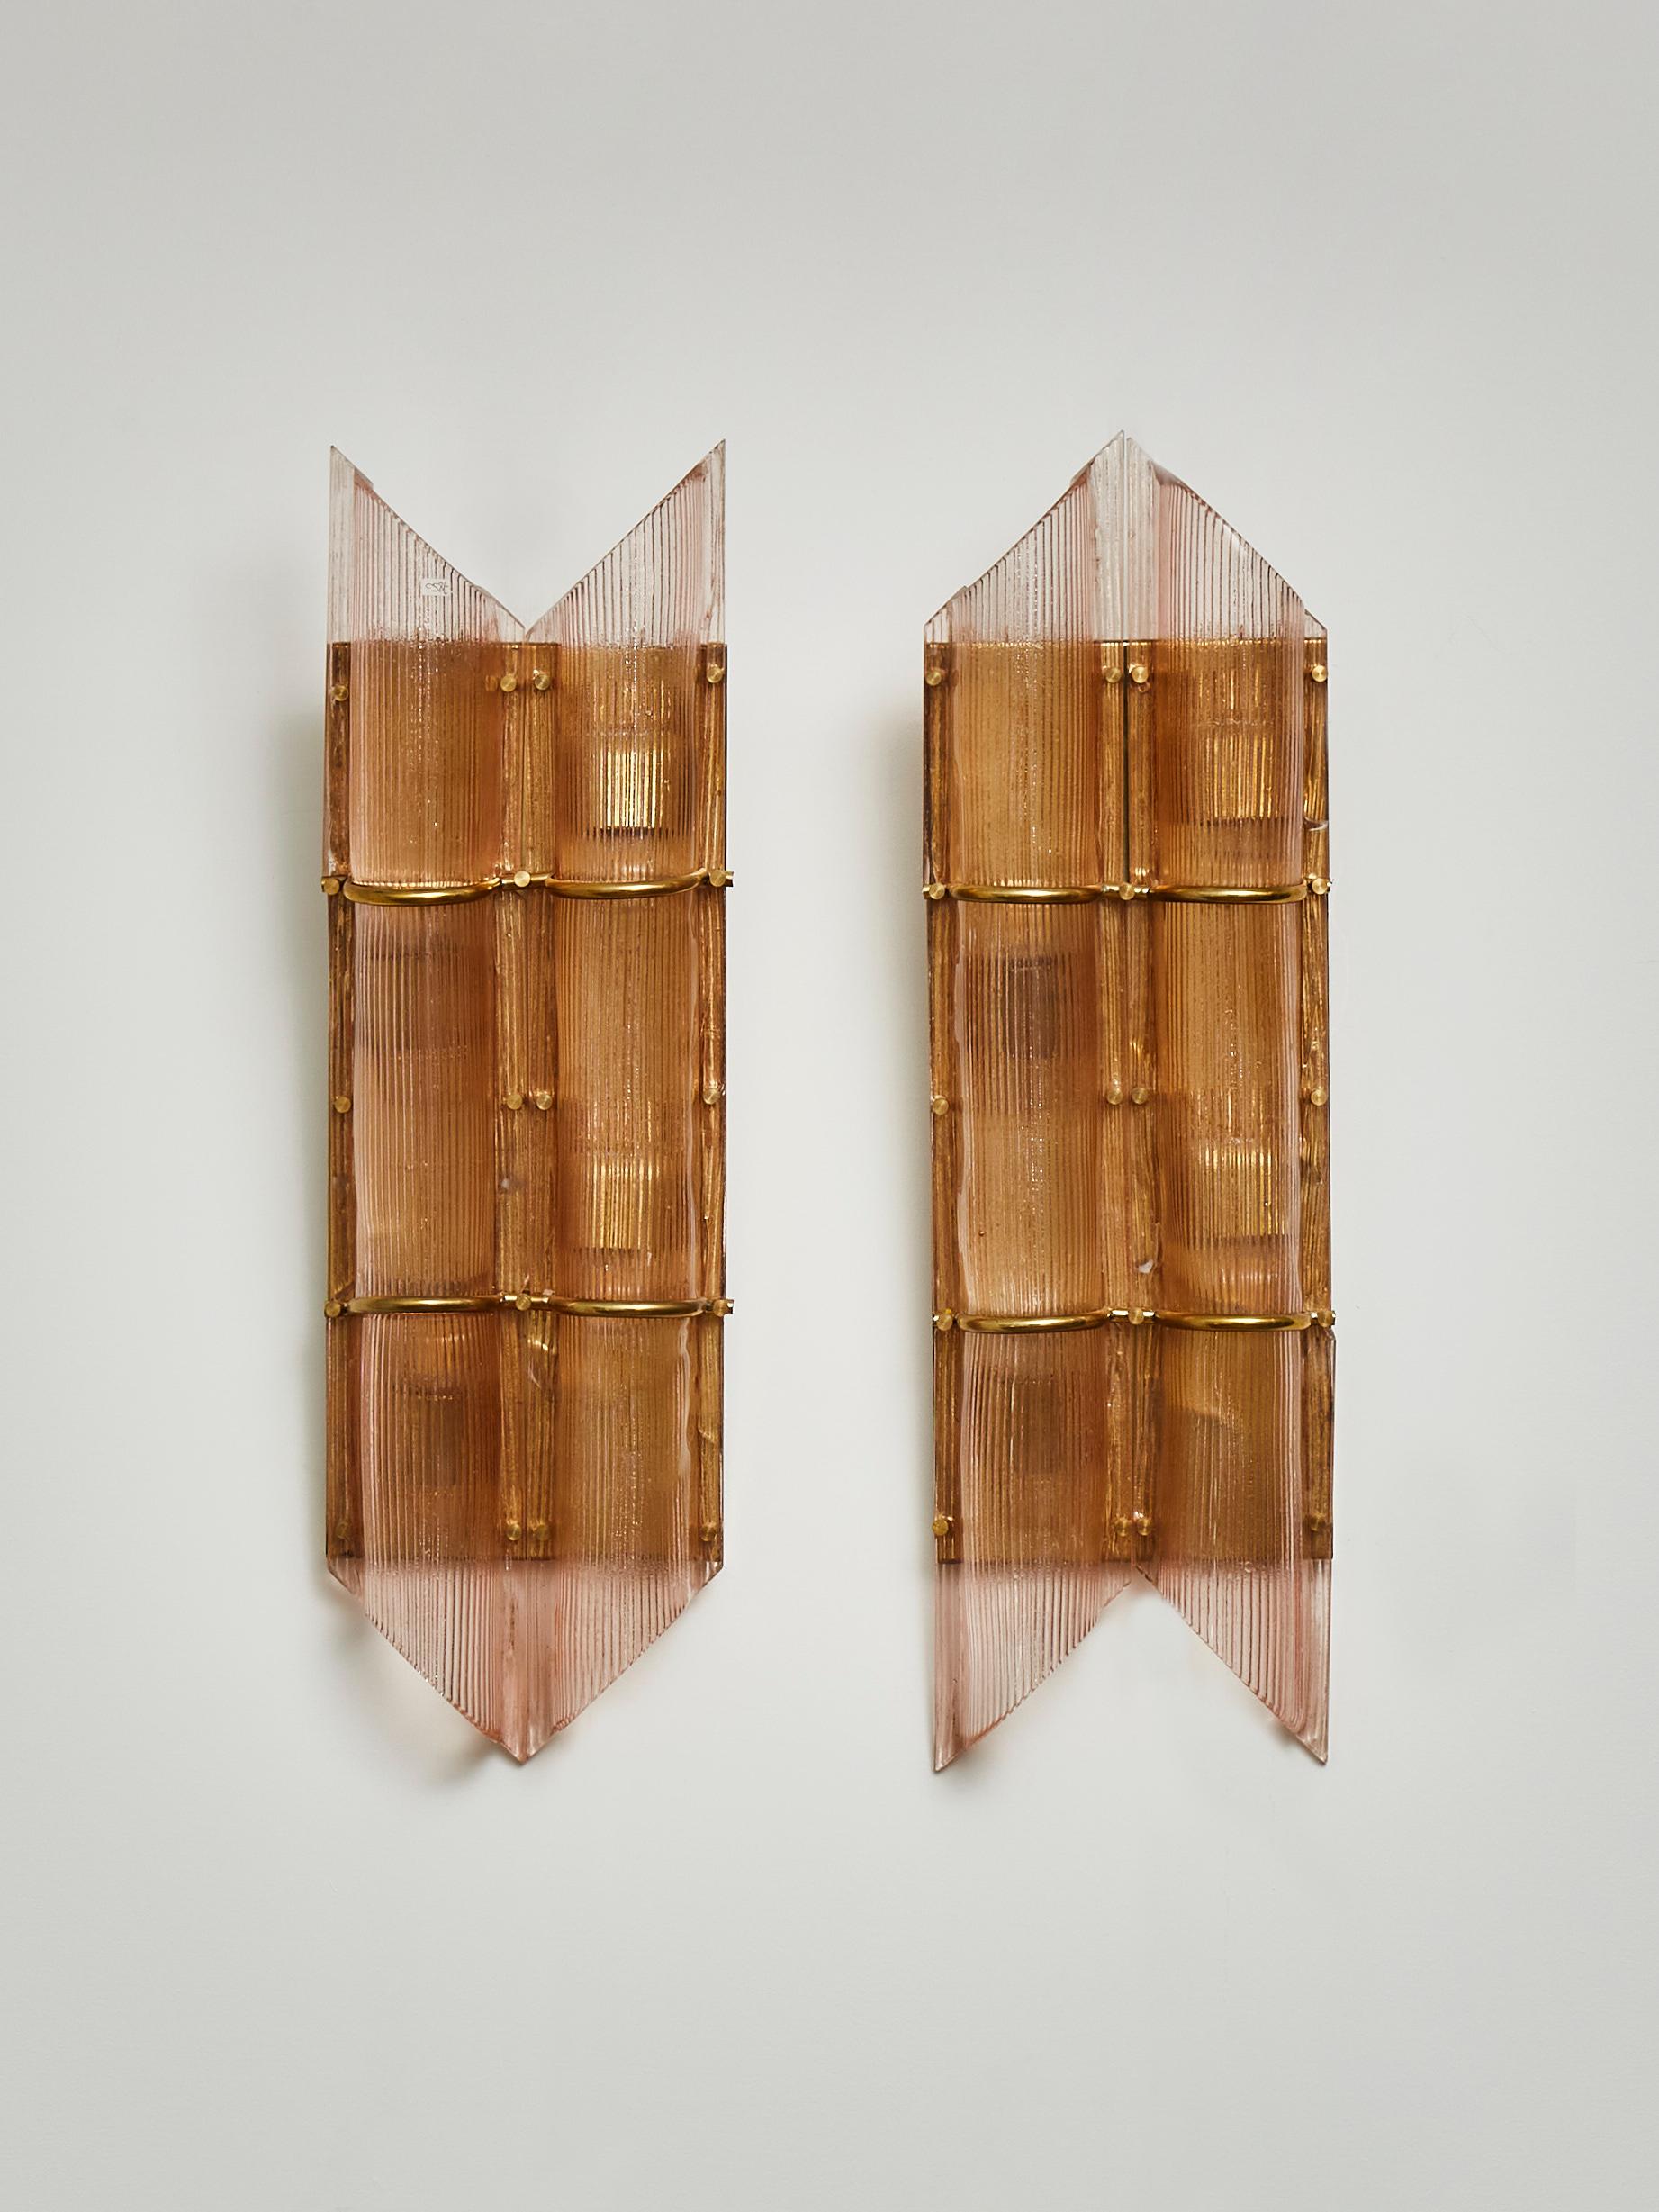 Elegant pair of vintage wall sconces in brass with tainted Murano glass.
Italy, 1970s.